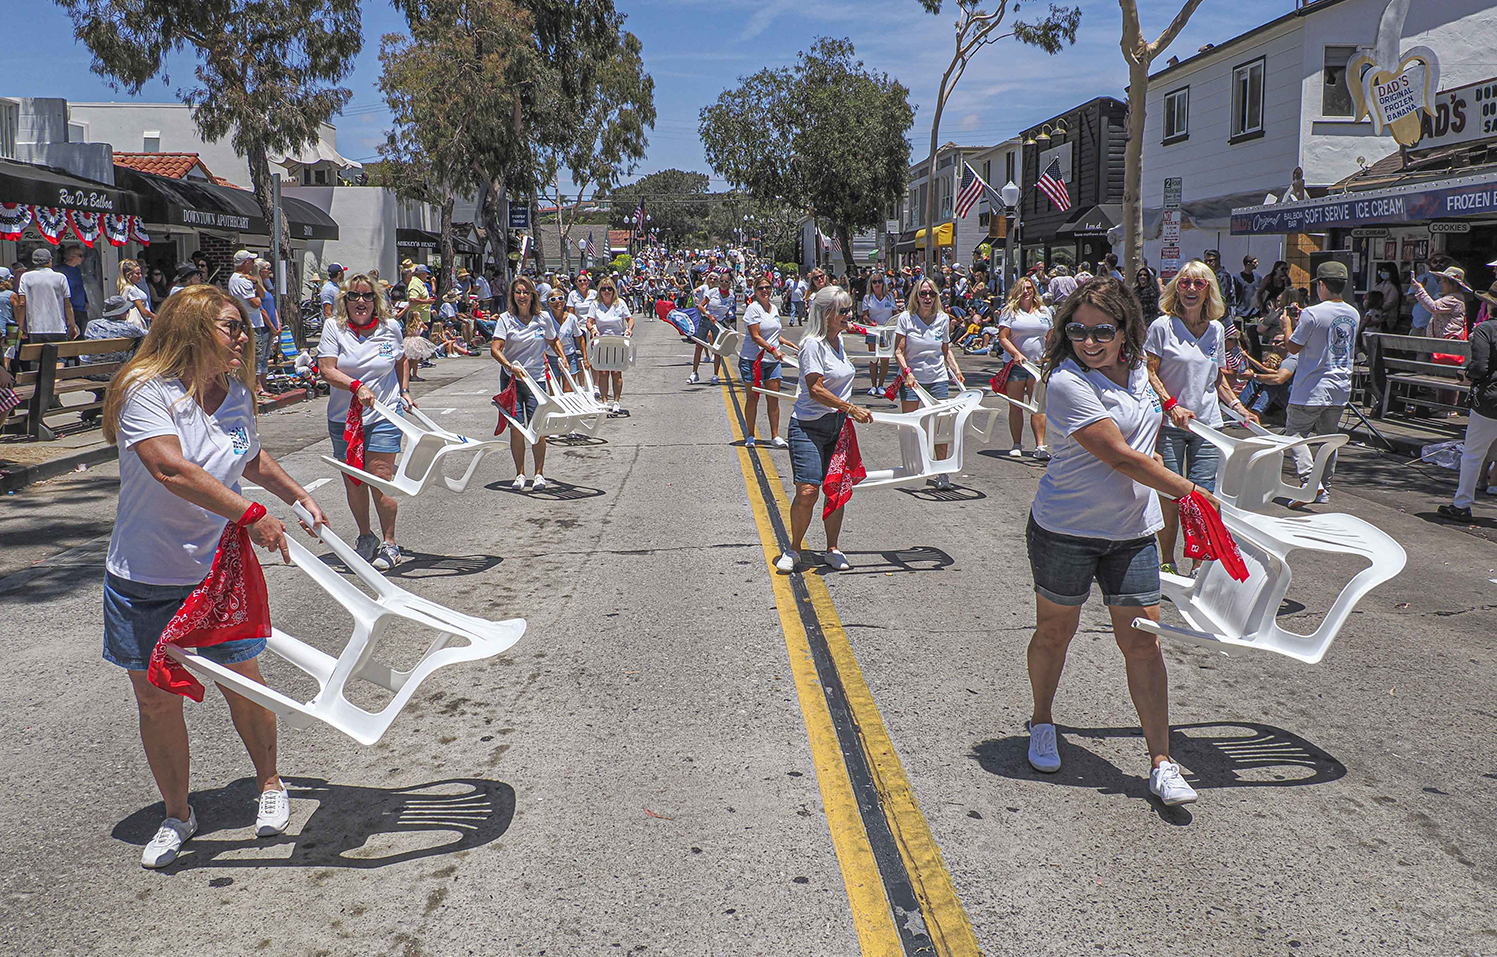 Entries Now Open for the Annual Balboa Island Parade on June 4